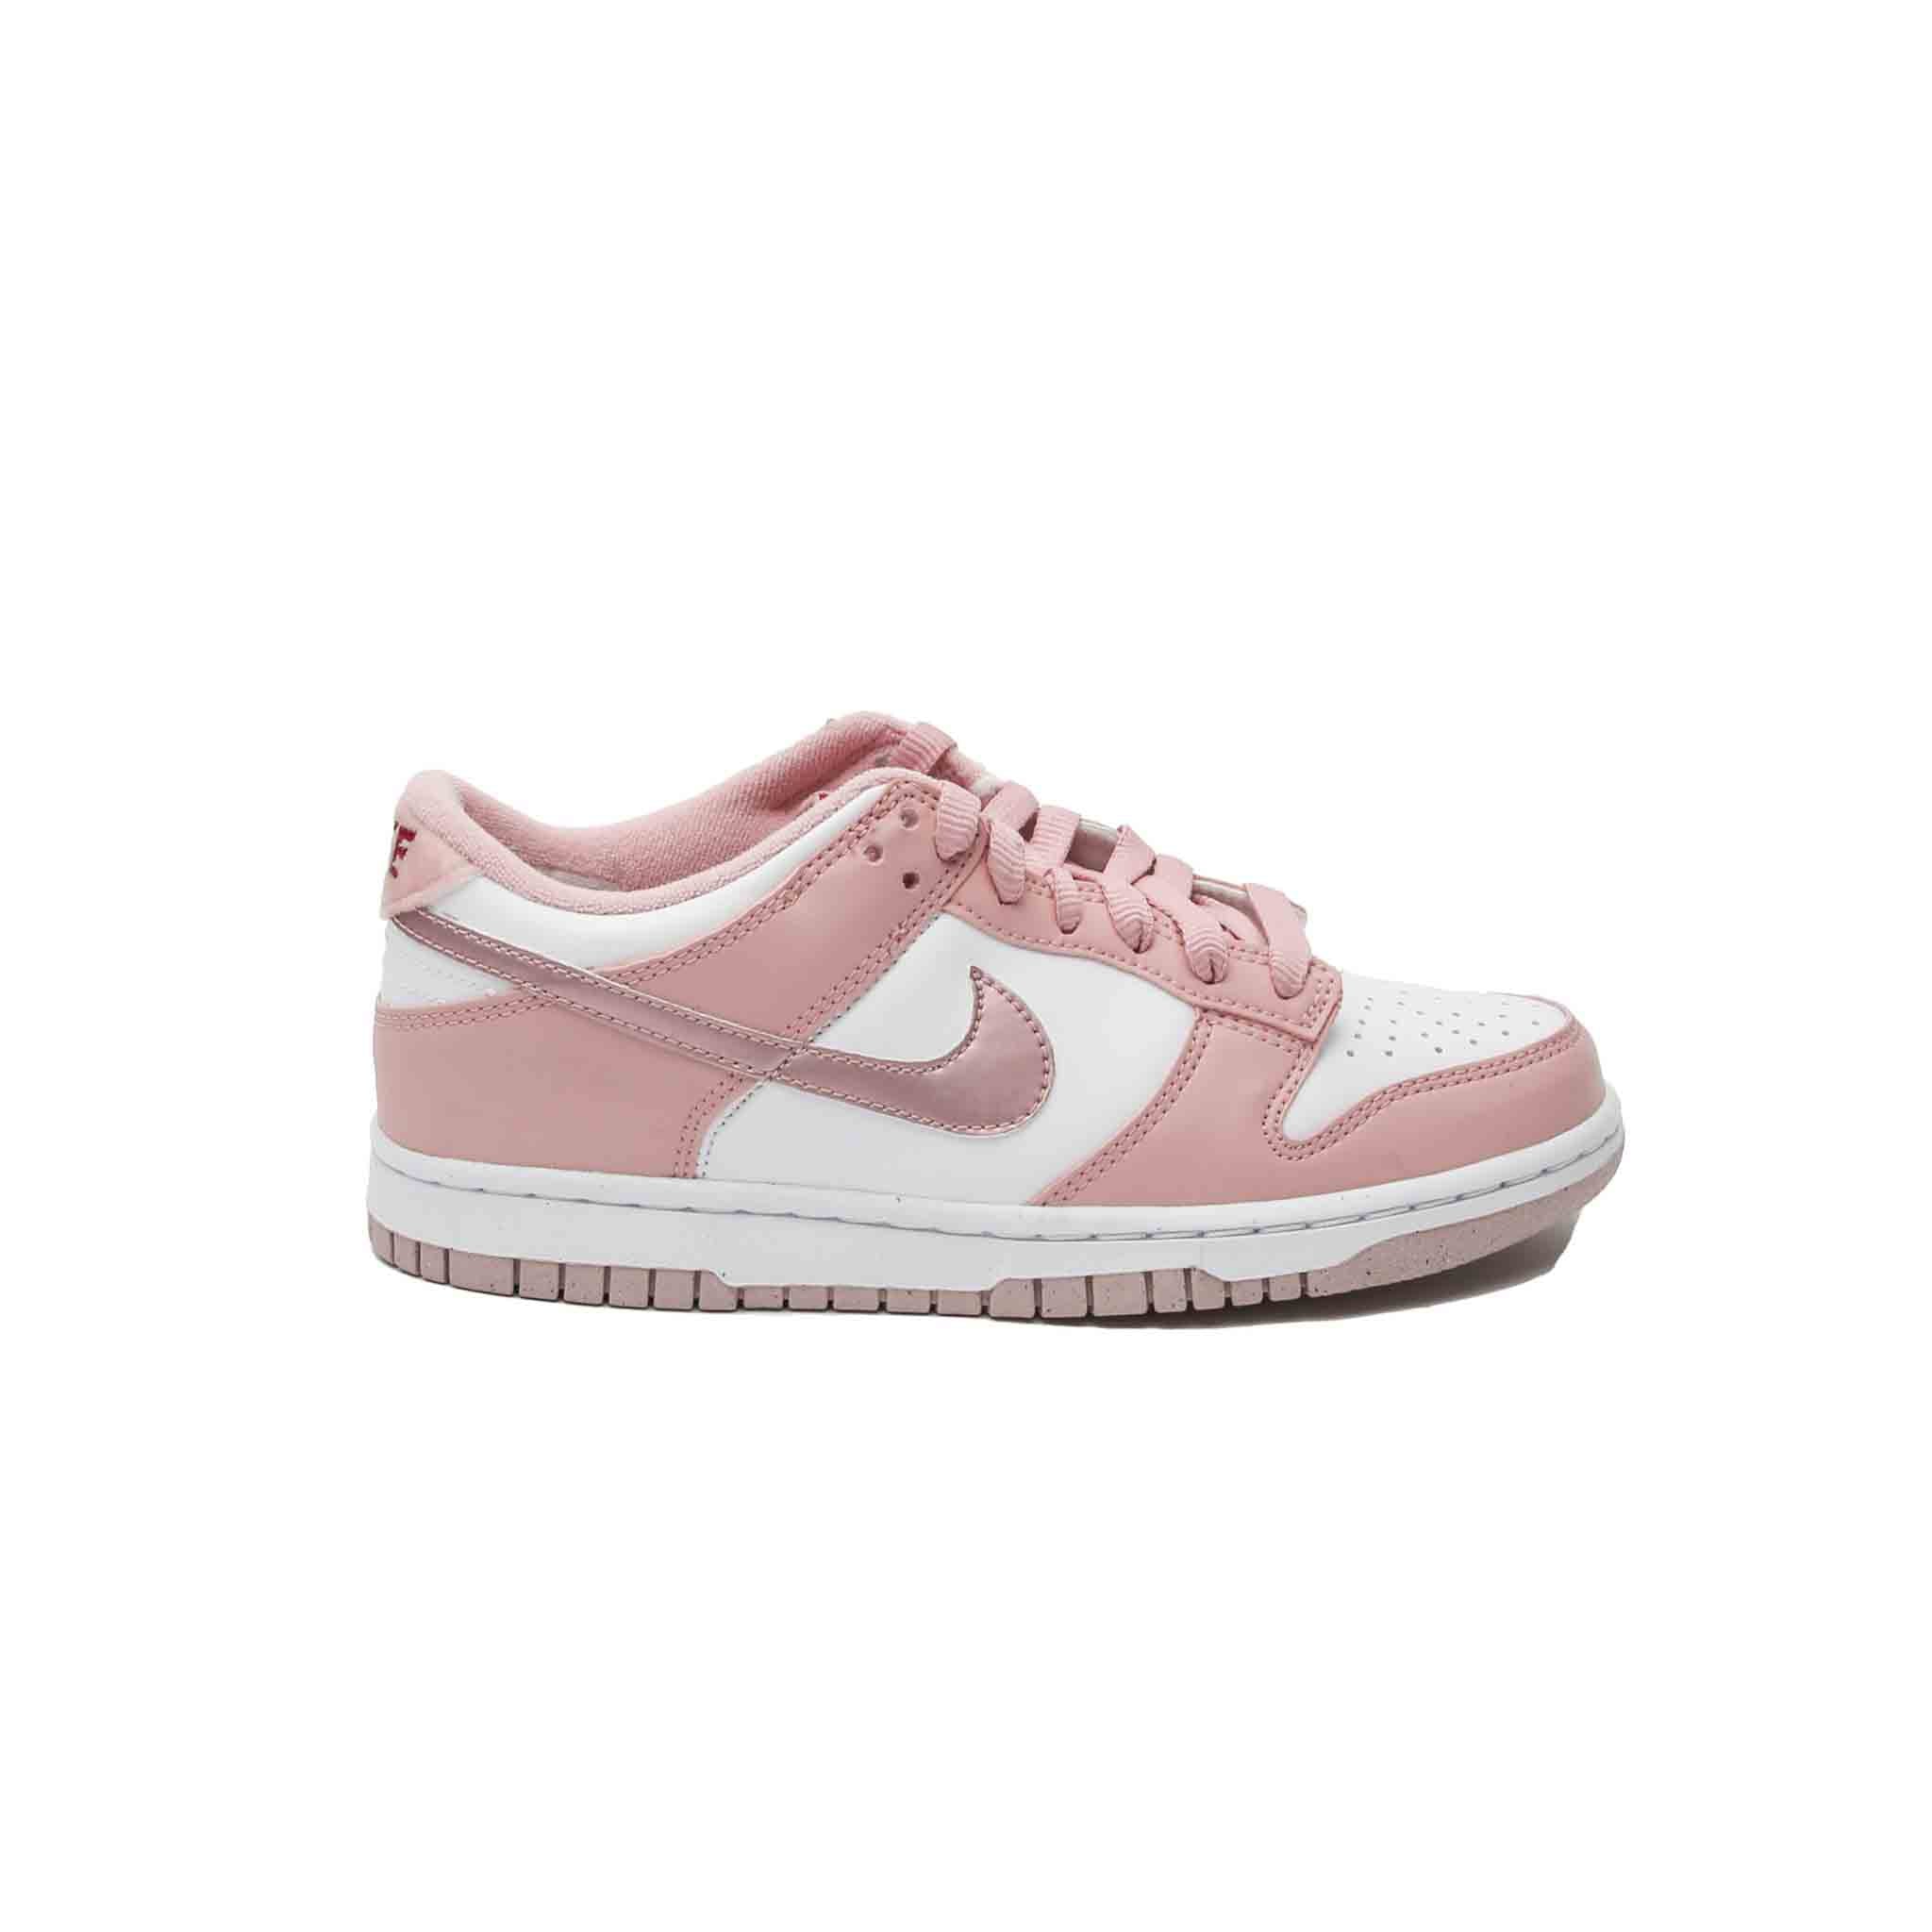 The Nike Dunk Low is a stylish, high-performance sneaker that is perfect for casual wear. The pink and white leather uppers give this shoe a bold, eye-catching look, while the velvet tab at the back adds a touch of luxury. The rubber sole provides traction and durability, making this shoe a practical choice for any woman on the go. Whether paired with jeans or leggings, this sneaker is sure to become a go-to favourite.